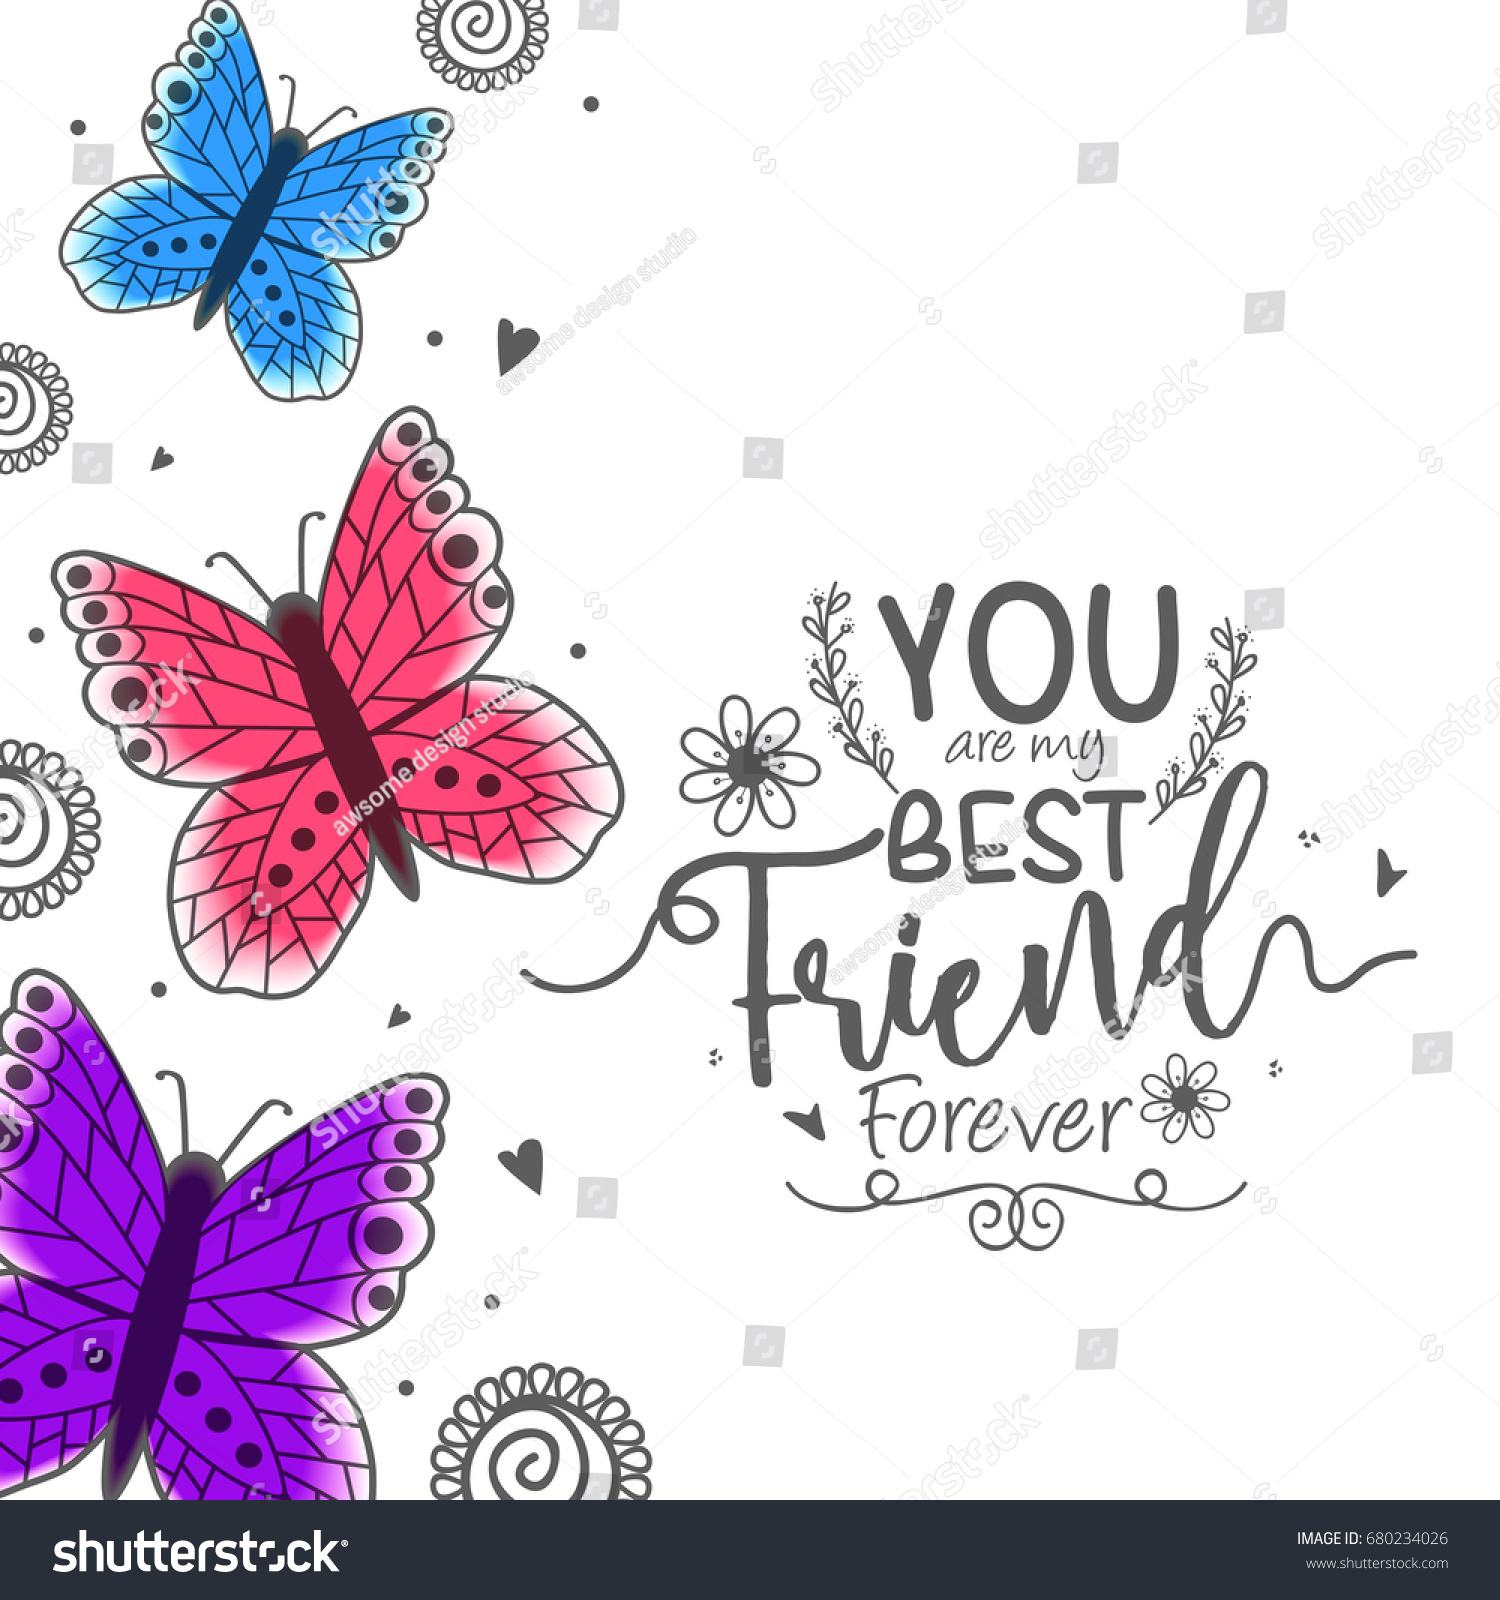 Illustration Happy Friendship Day Best Friends Stock Vector Royalty Free